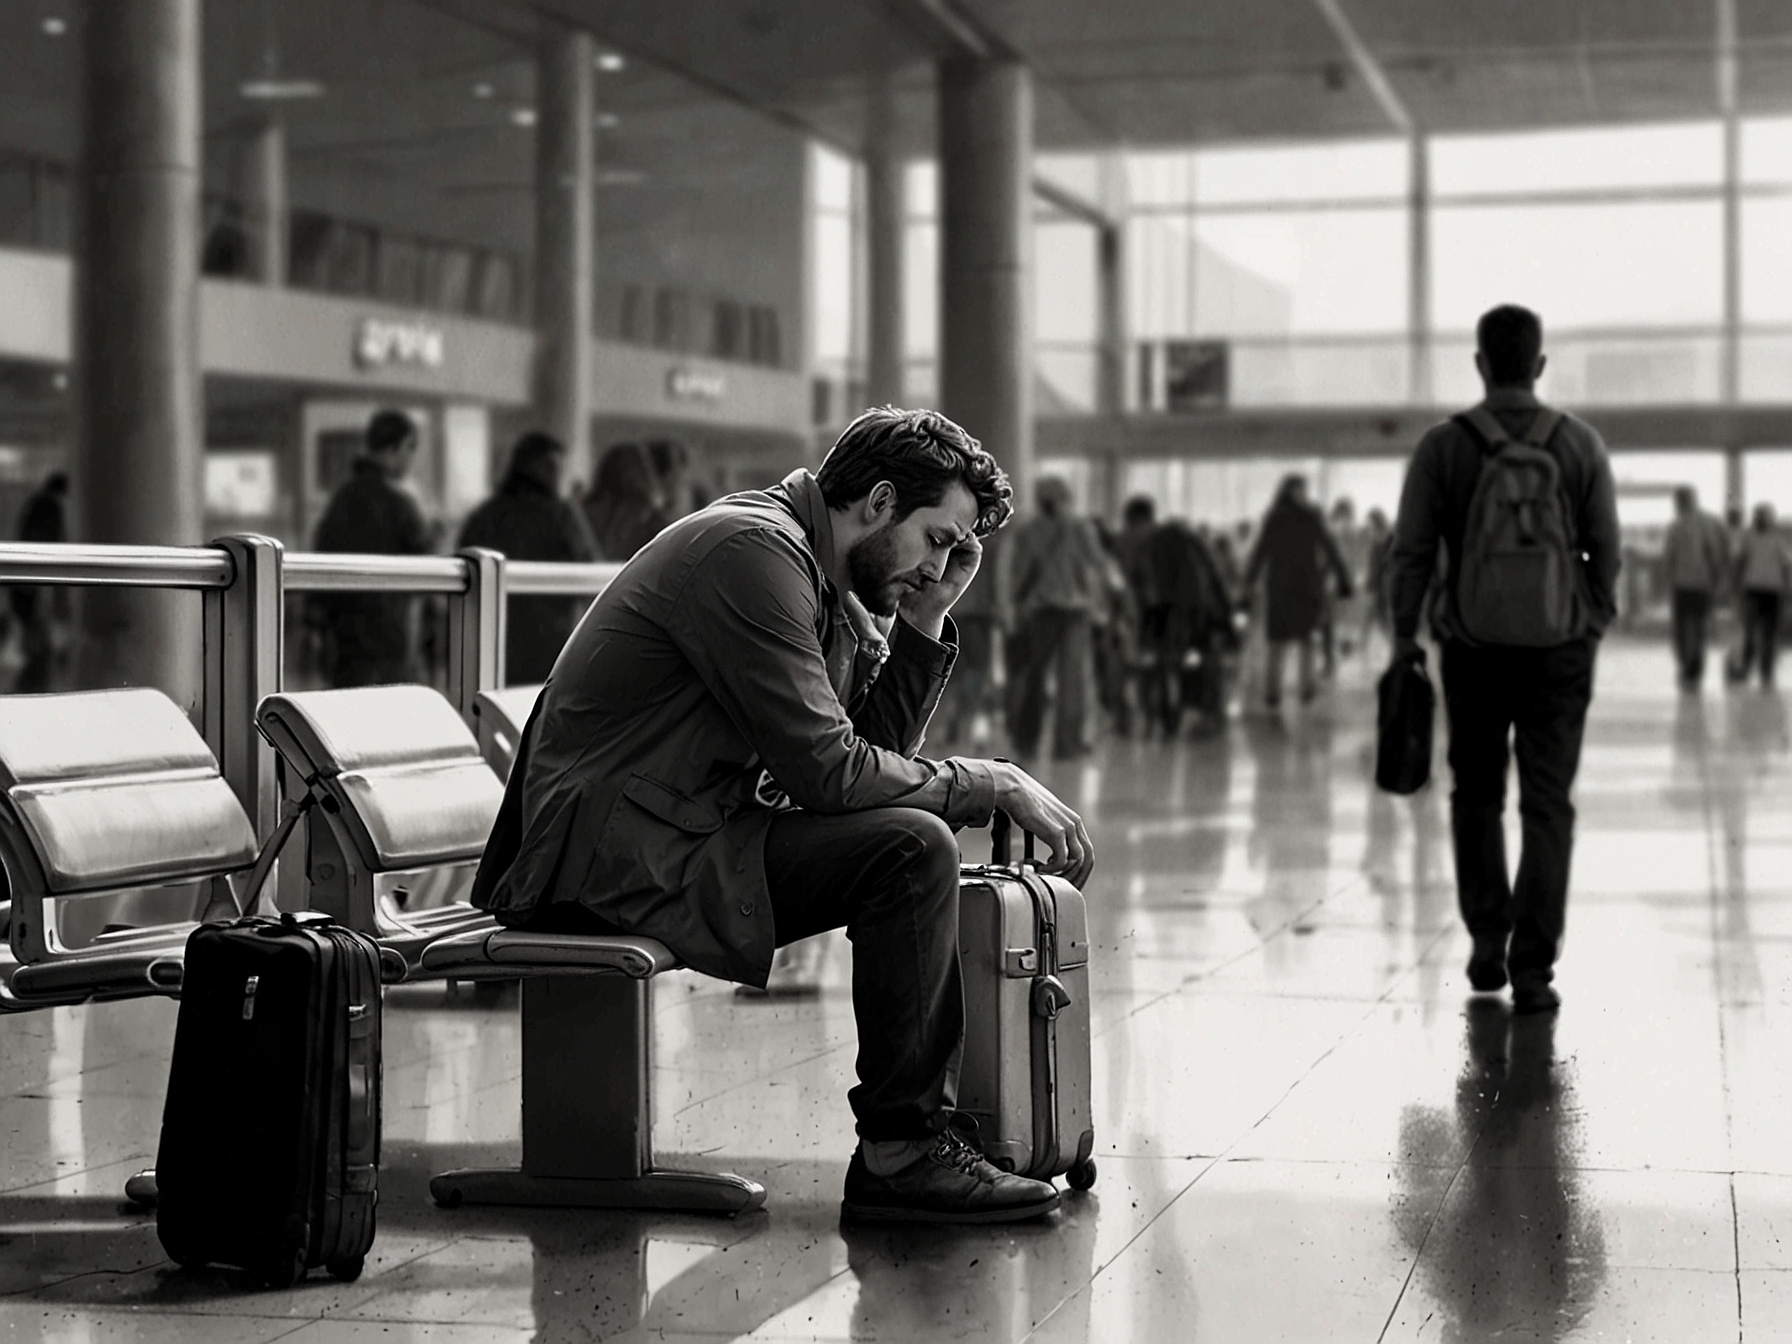 A frustrated traveler in an airport, unable to connect via their smartphone due to international roaming service outages from major U.S. mobile carriers like AT&T, T-Mobile, and Verizon.